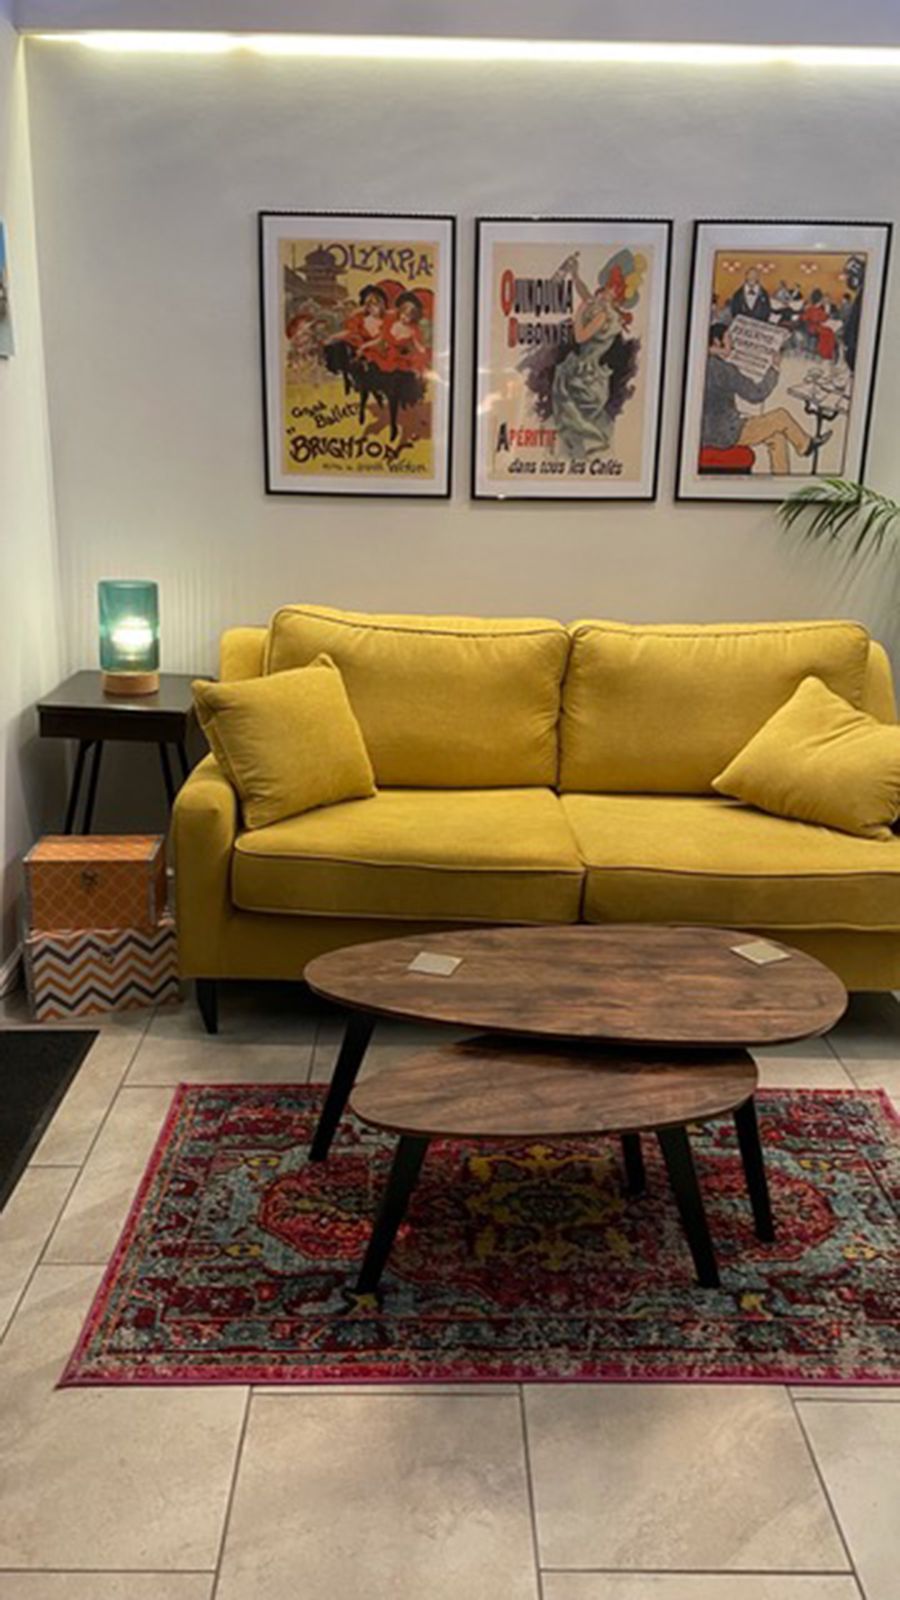 Yellow upholstered three-person sofa Orson